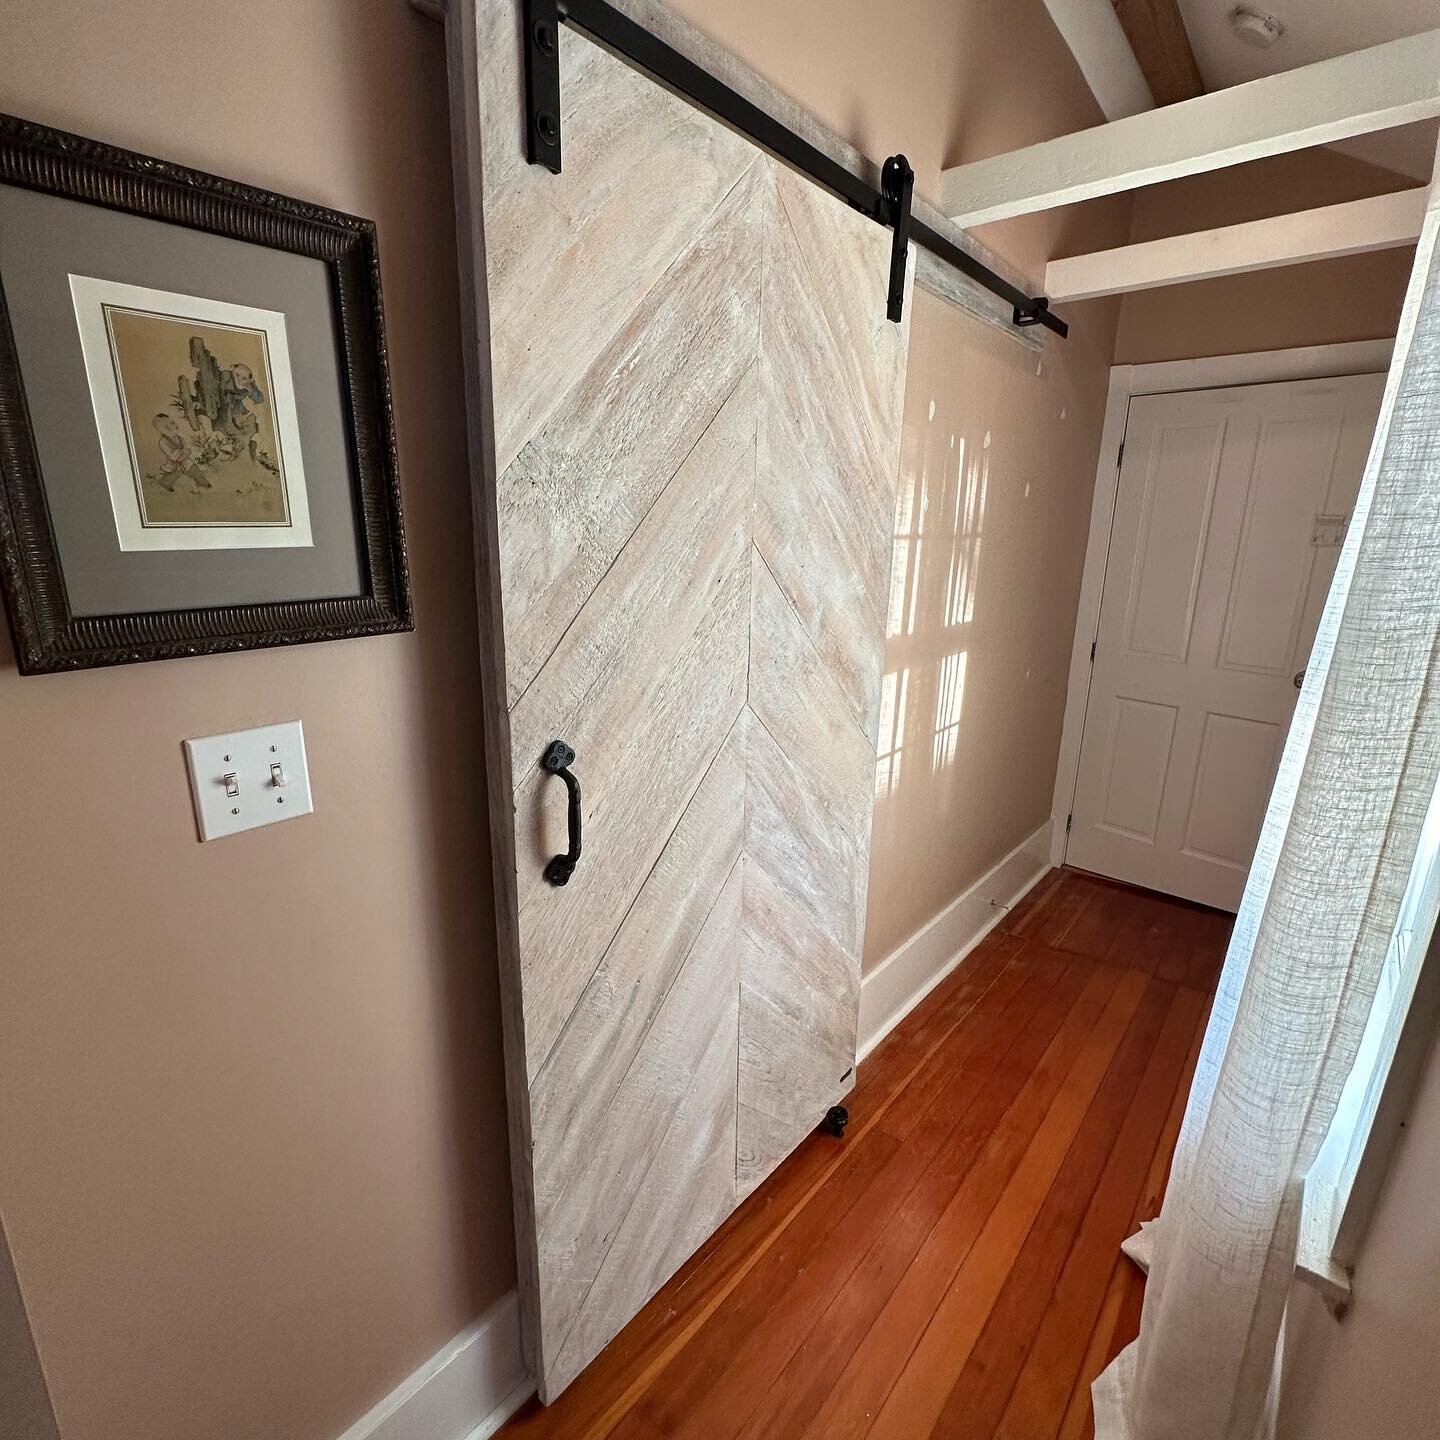 Melissa and Noah in Beverly, MA have a lovely historic home in town that originally had a &ldquo;sliding kit door&rdquo; installed in the upstairs hallway for the main bathroom.

This had to go as their desire was for something more authentic and bes